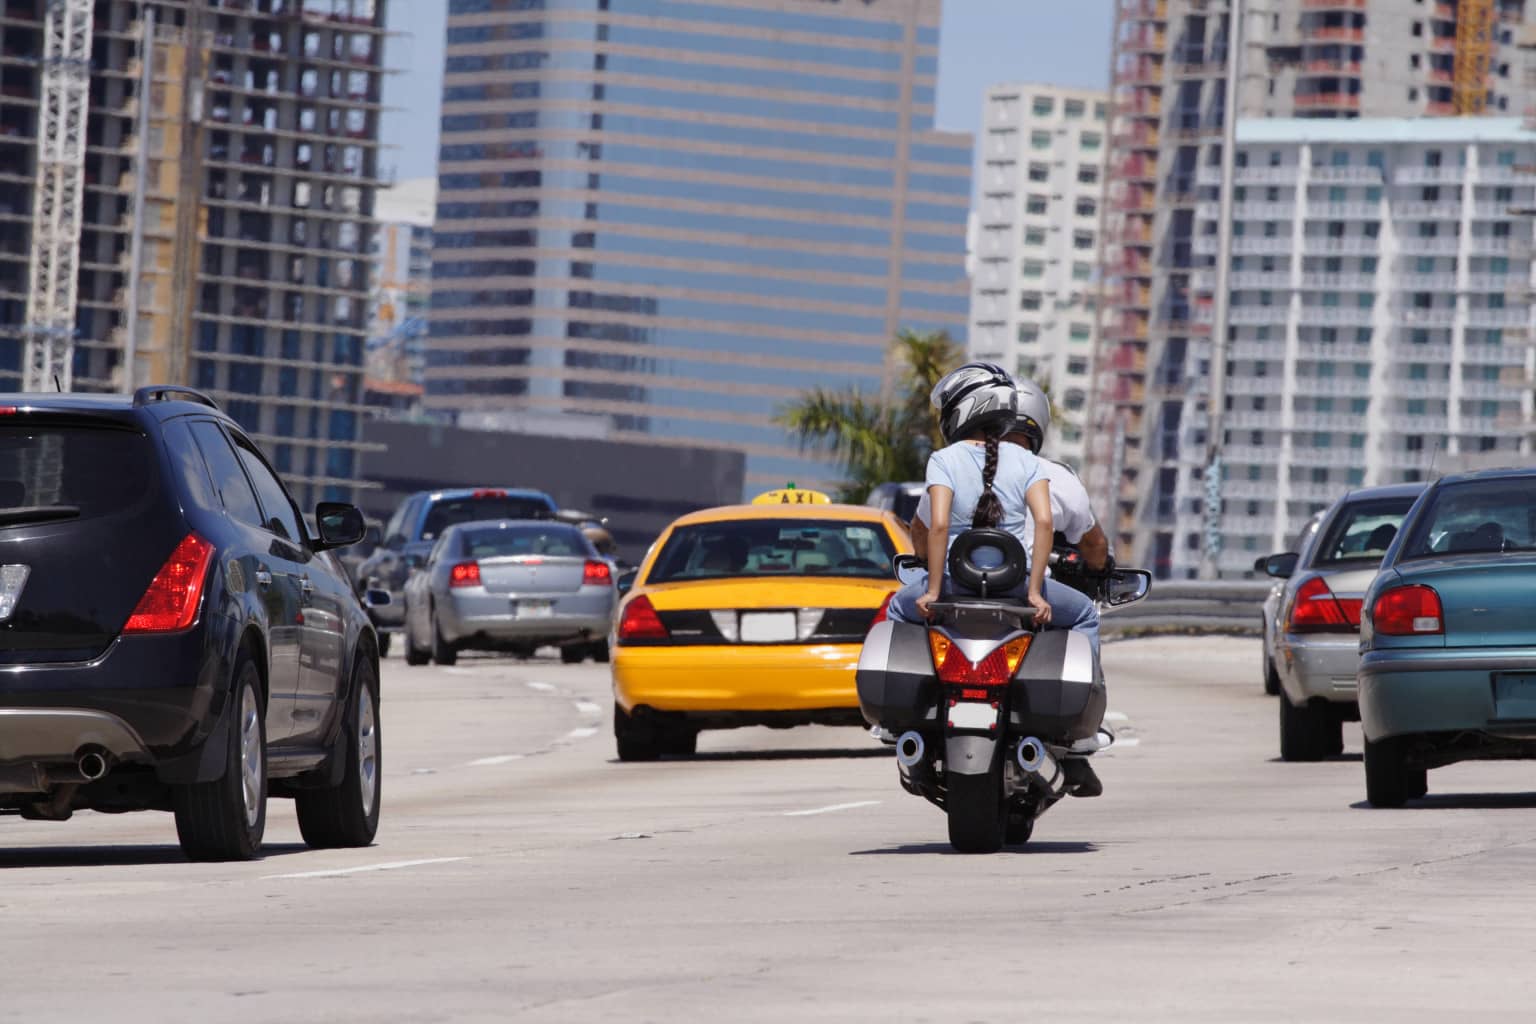 where do most motorcycle accidents occur in california